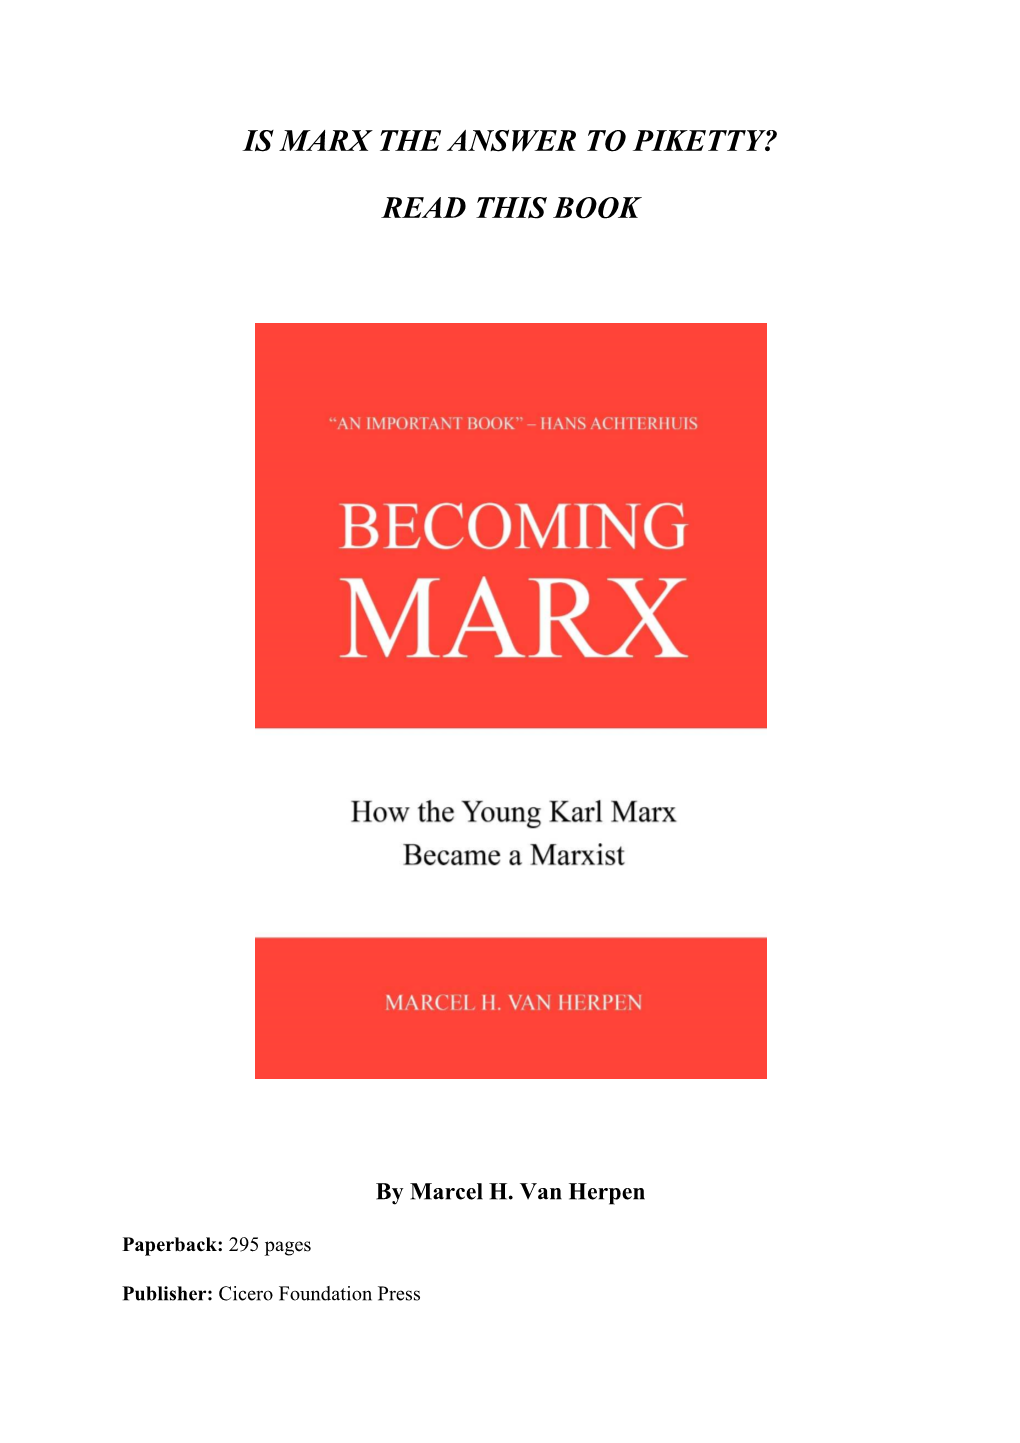 How the Young Karl Marx Became a Marxist